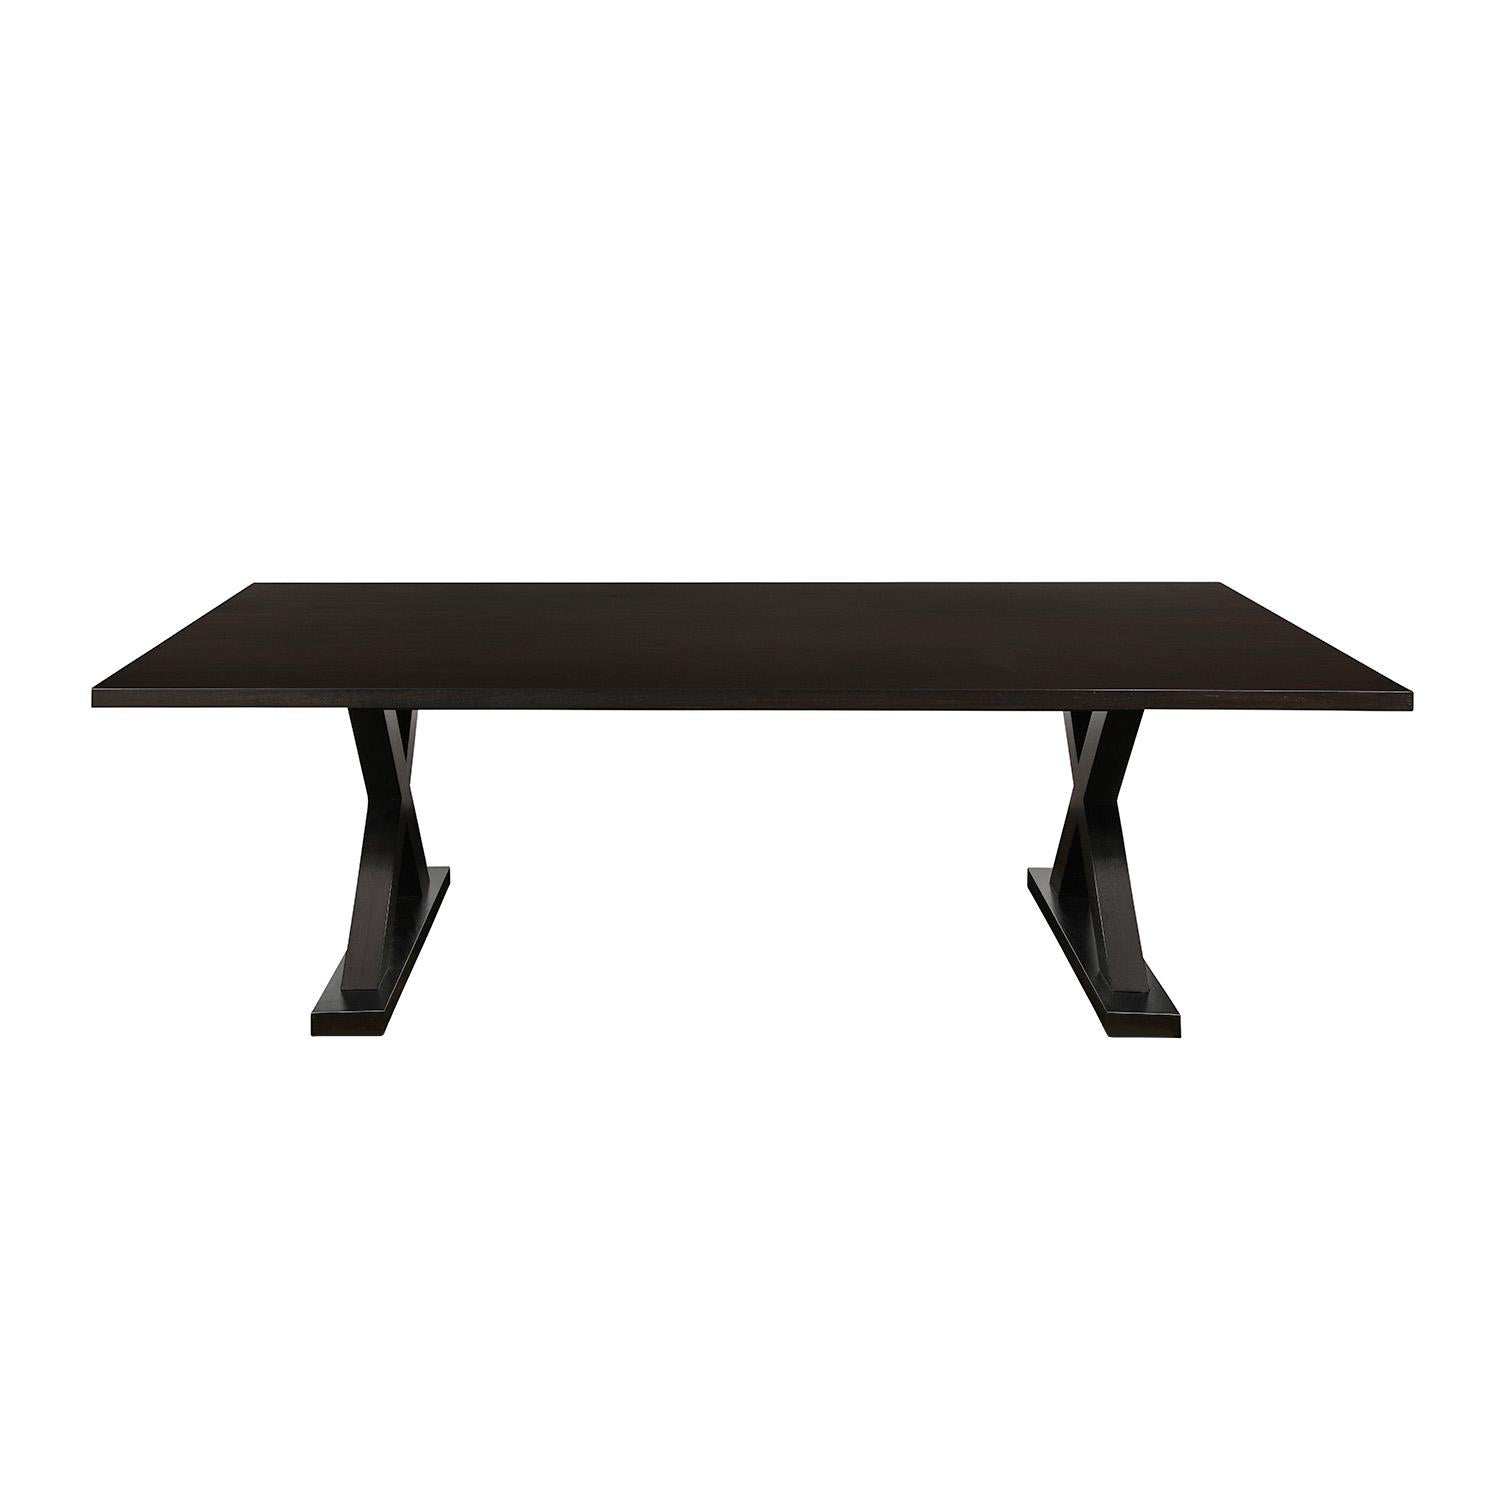 Long Courier dining table in dark oak with X base by Christian Liaigre and sold through Holly Hunt, American 2000's (label on the bottom reads “CHRISTIAN LIAIGRE AT HOLLY HUNT”). This table is a timeless classic.